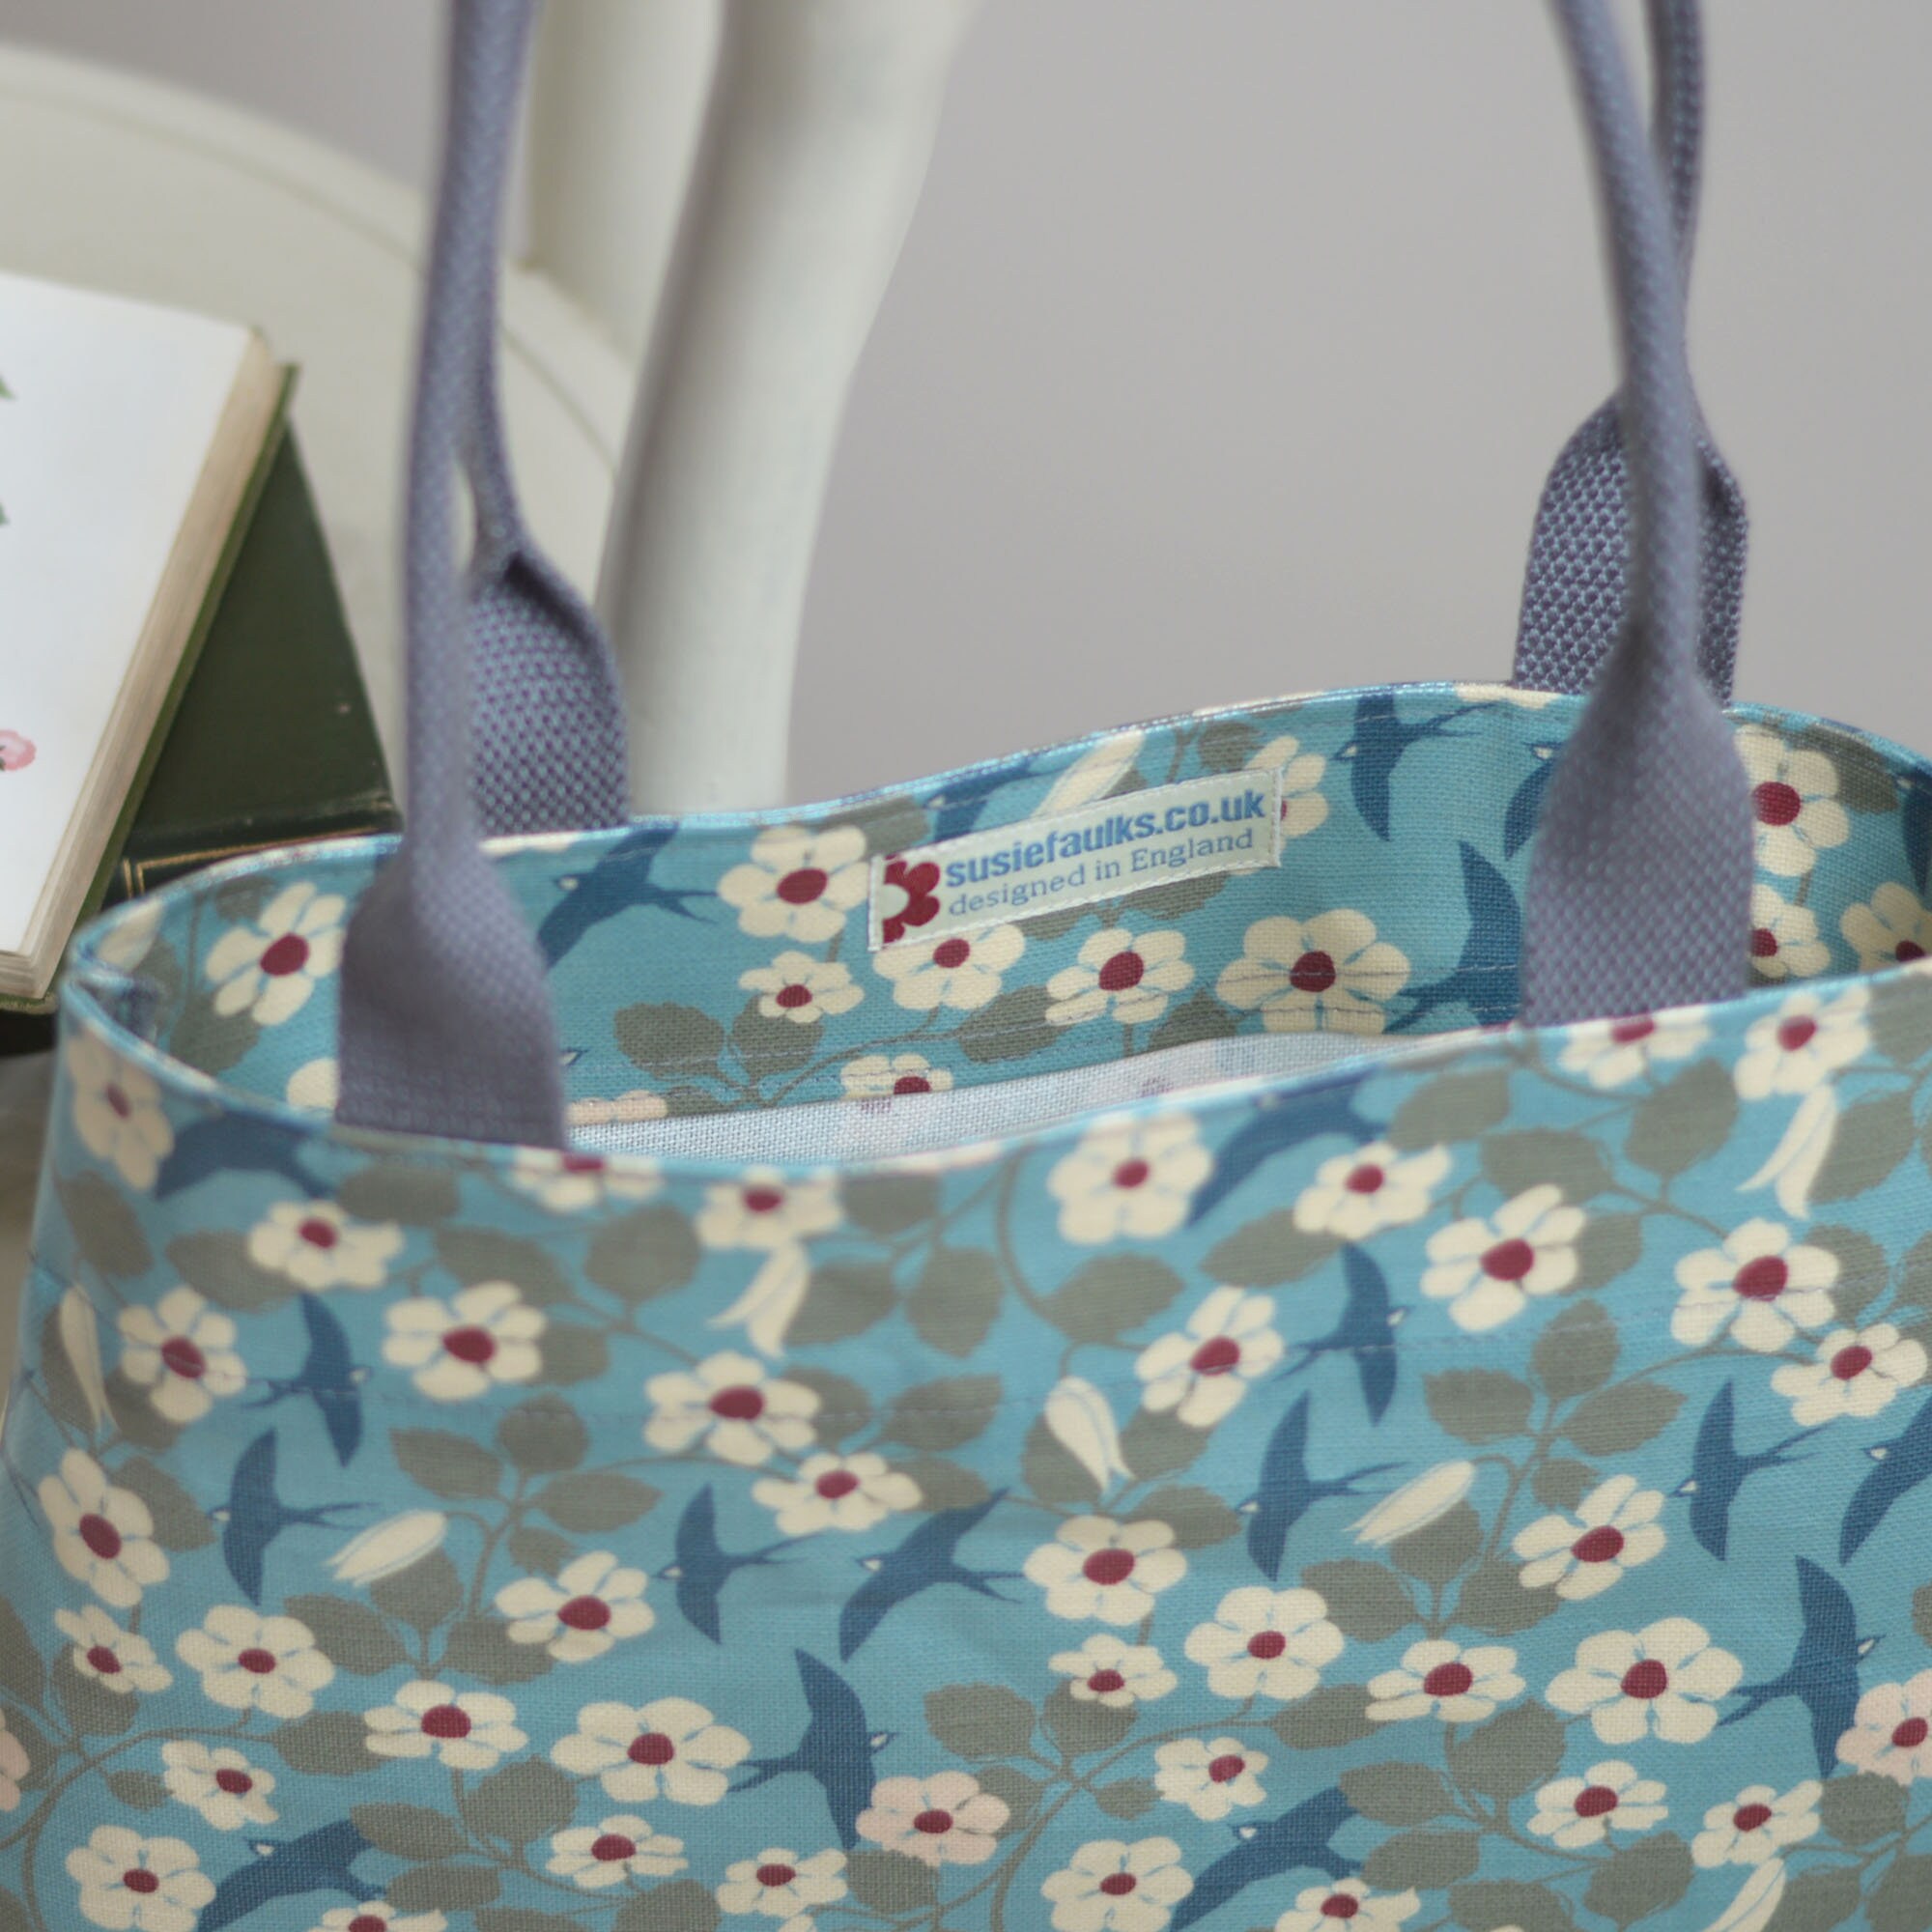 Swifts Tote Bag by Susie Faulks/ Bag/ Oilcloth Bags/ Best - Etsy UK